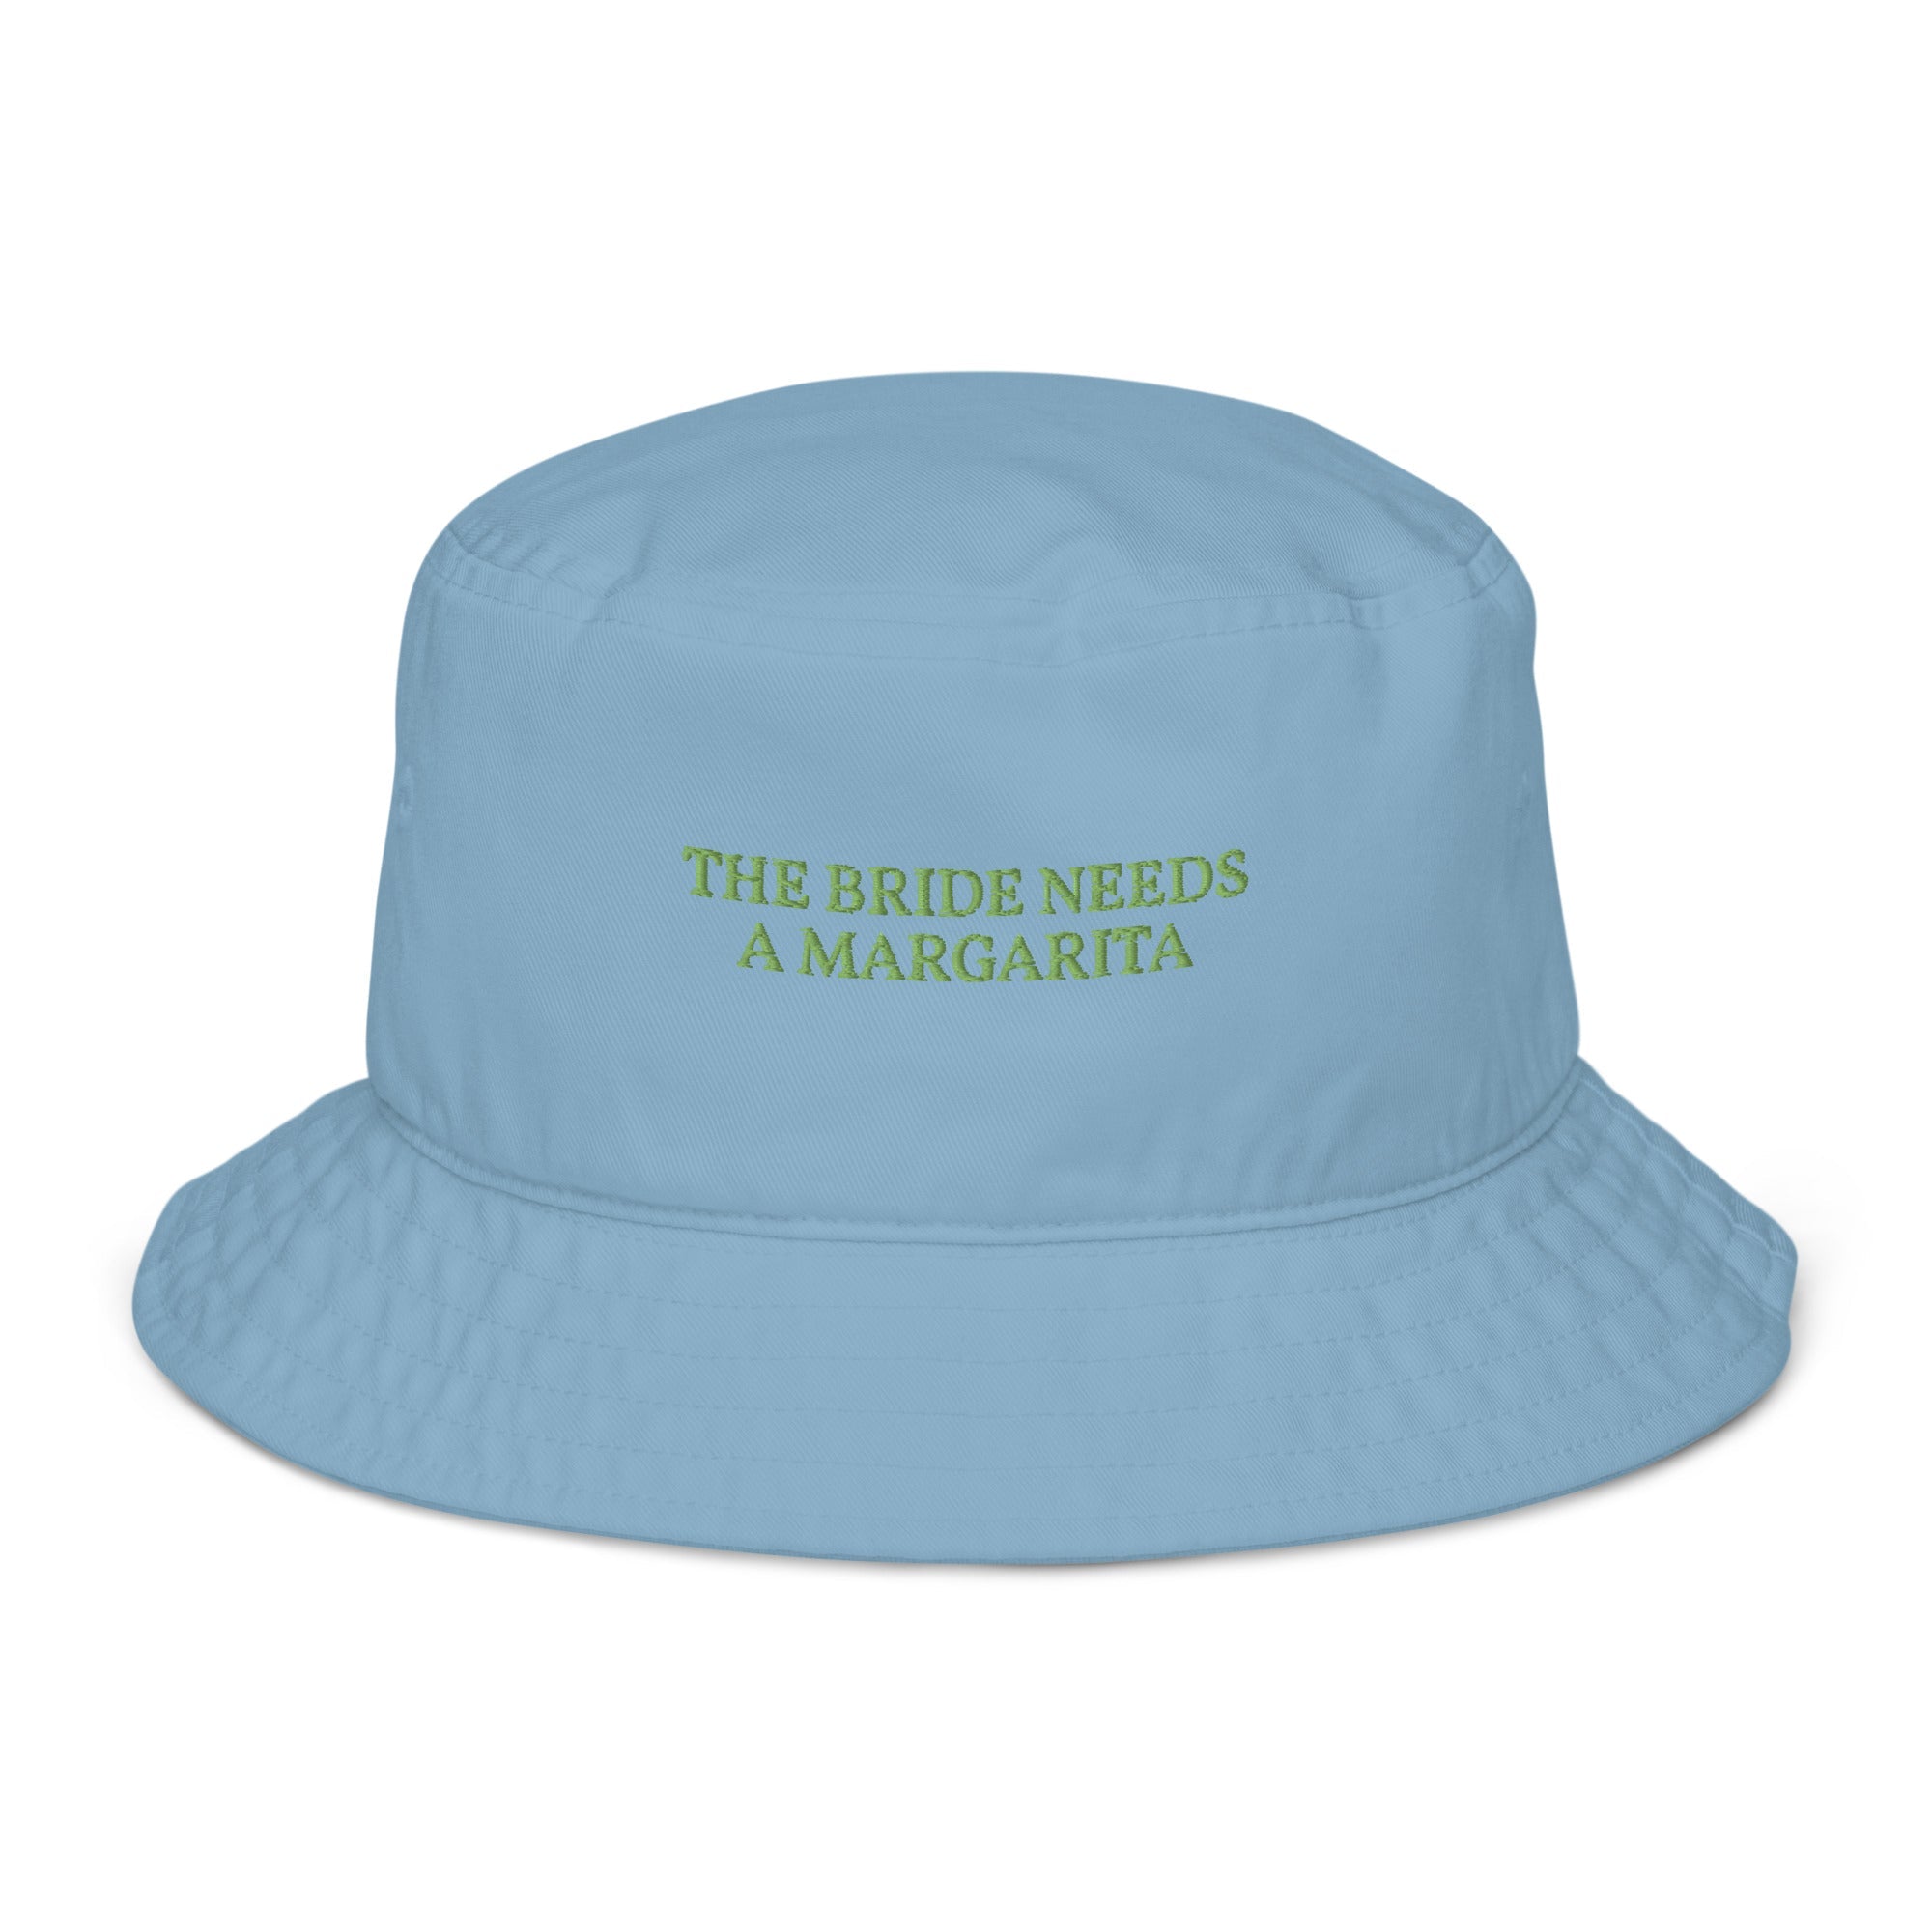 The Bride needs a Margarita - Embroidered Organic Bucket Hat - The Refined Spirit